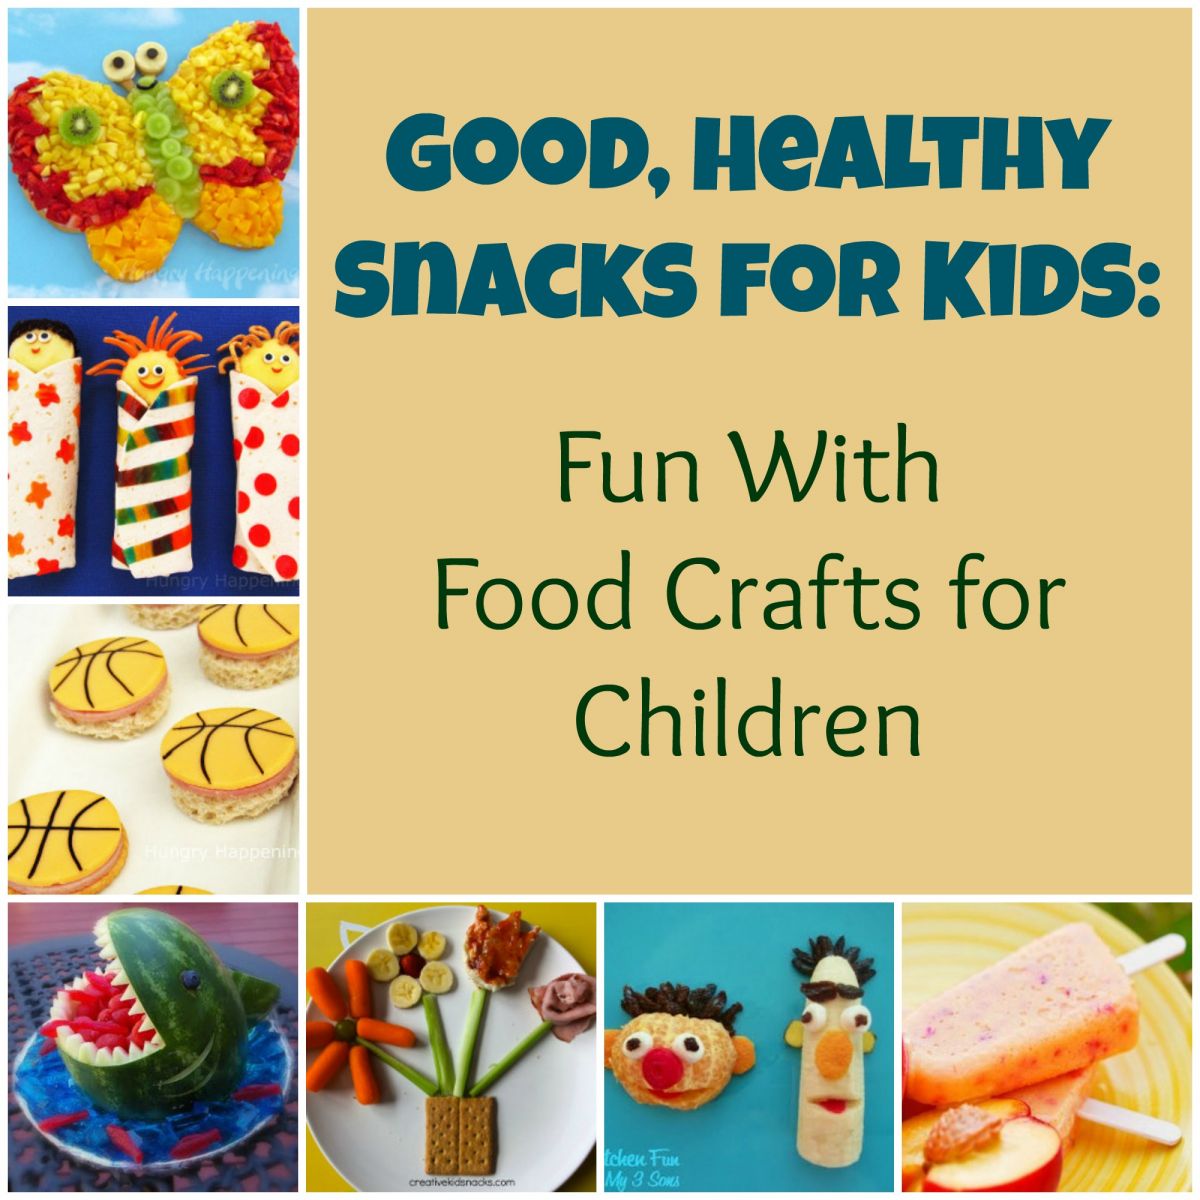 Good, Healthy Snacks for Kids: Fun with Food Crafts for Children